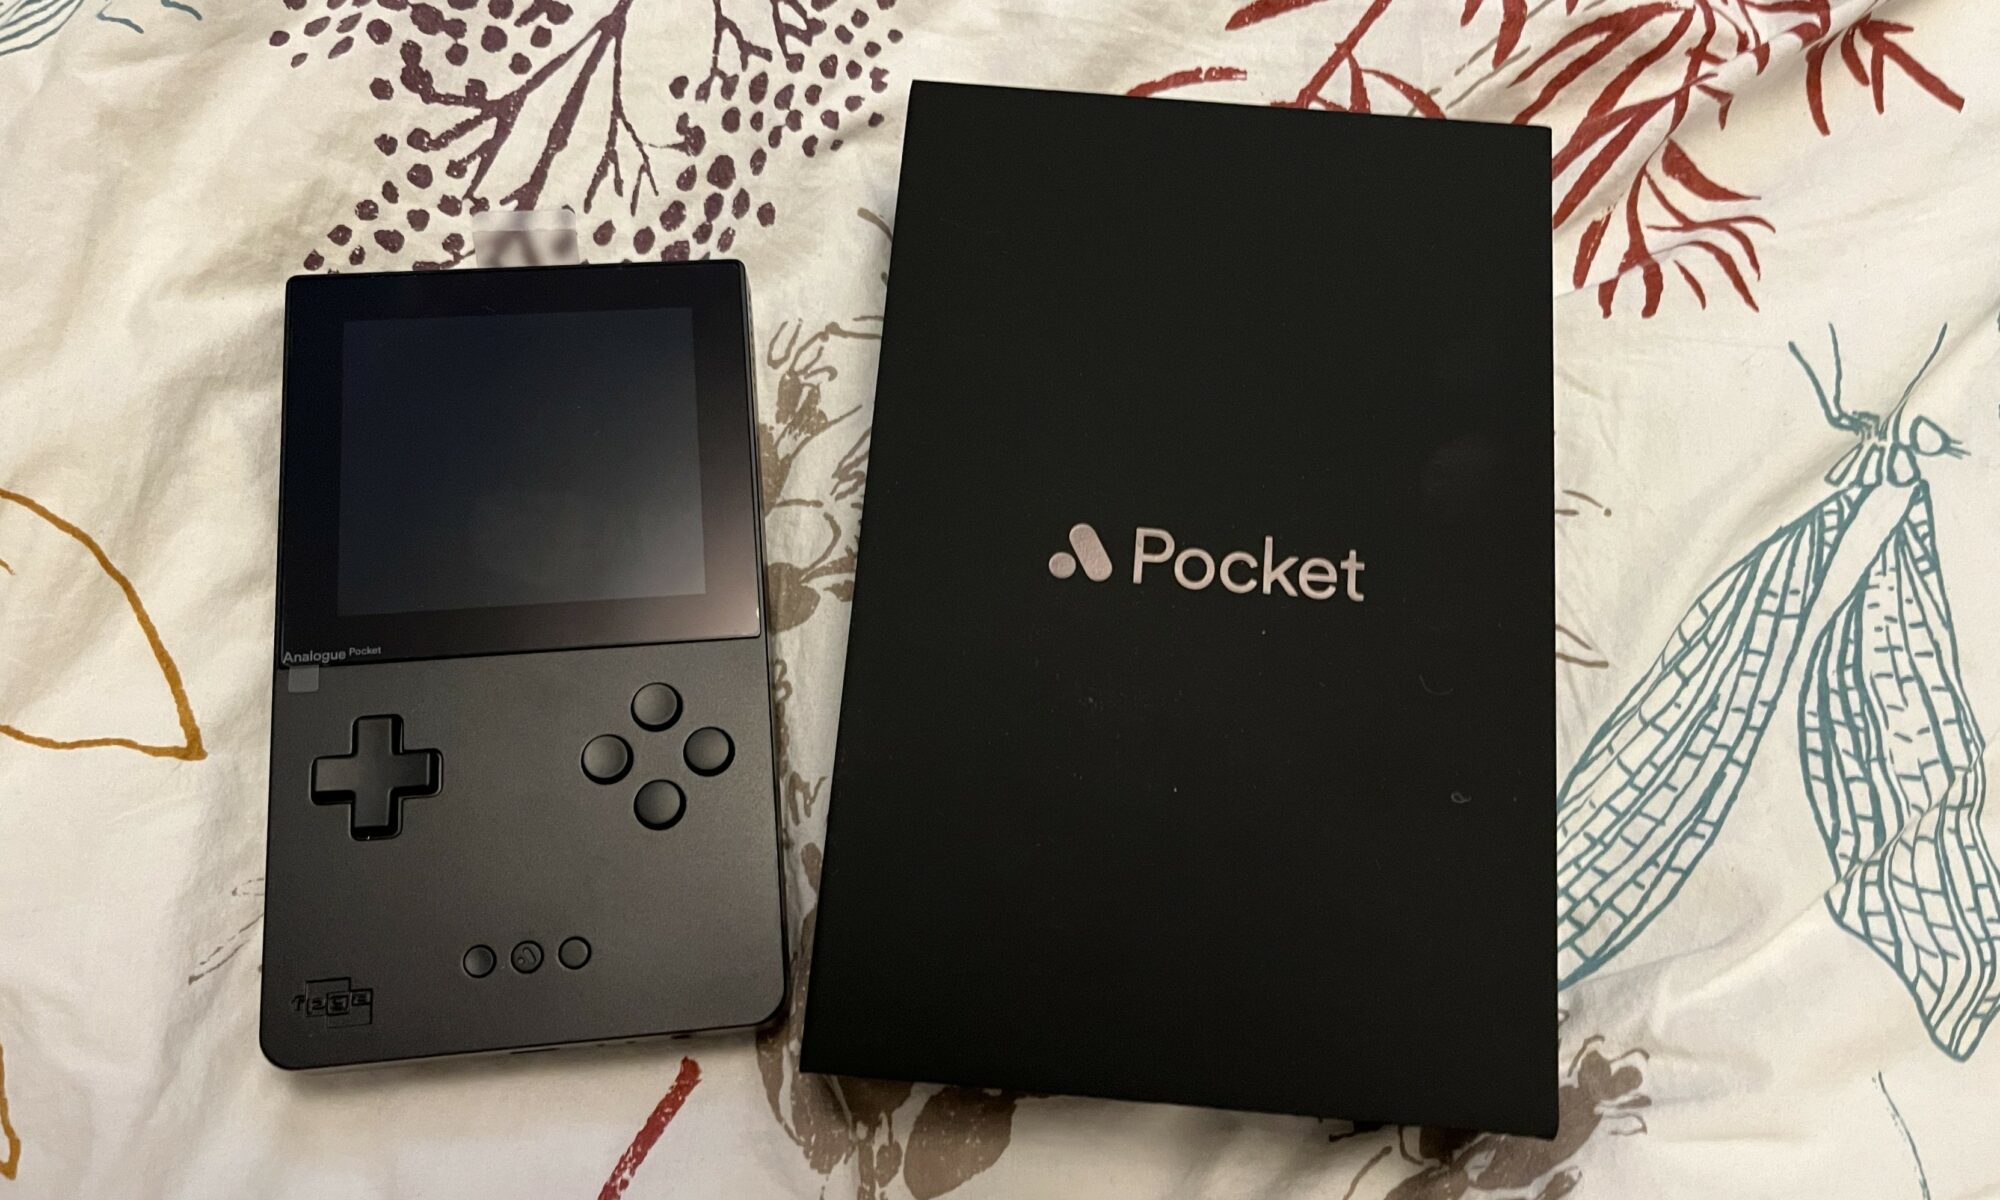 An Analogue Pocket retro gaming device with its box